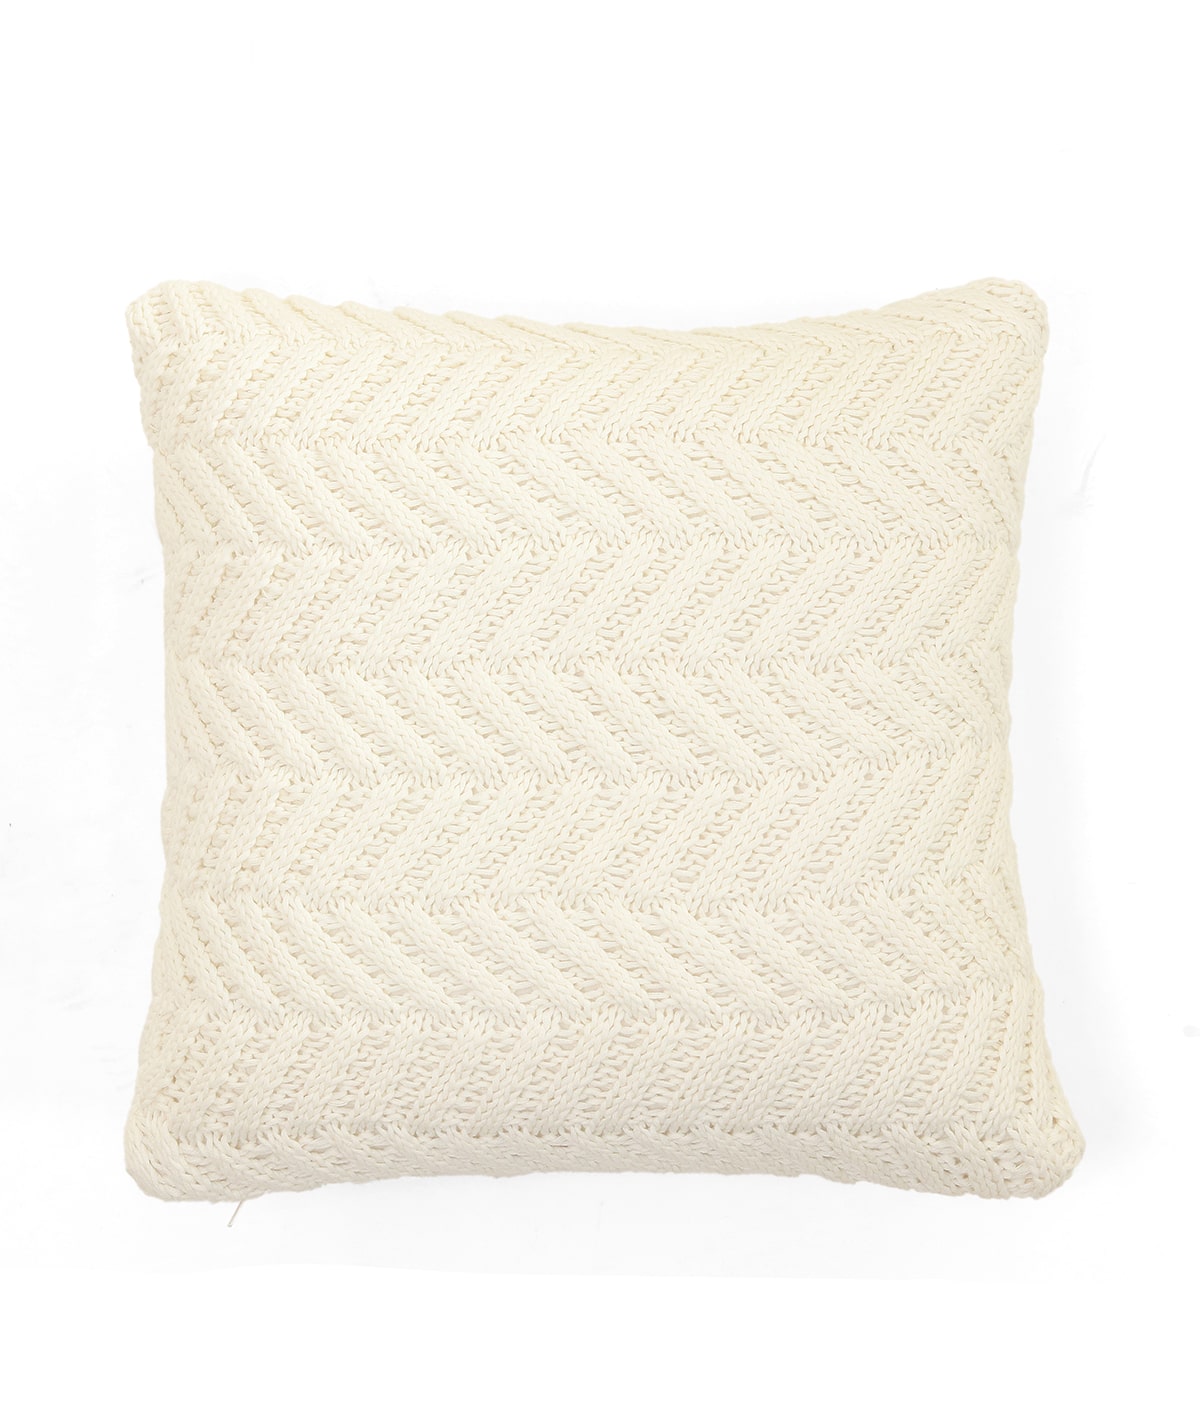 Chevron Ivory Cotton Knitted Decorative 16 X 16 Inches Cushion Cover